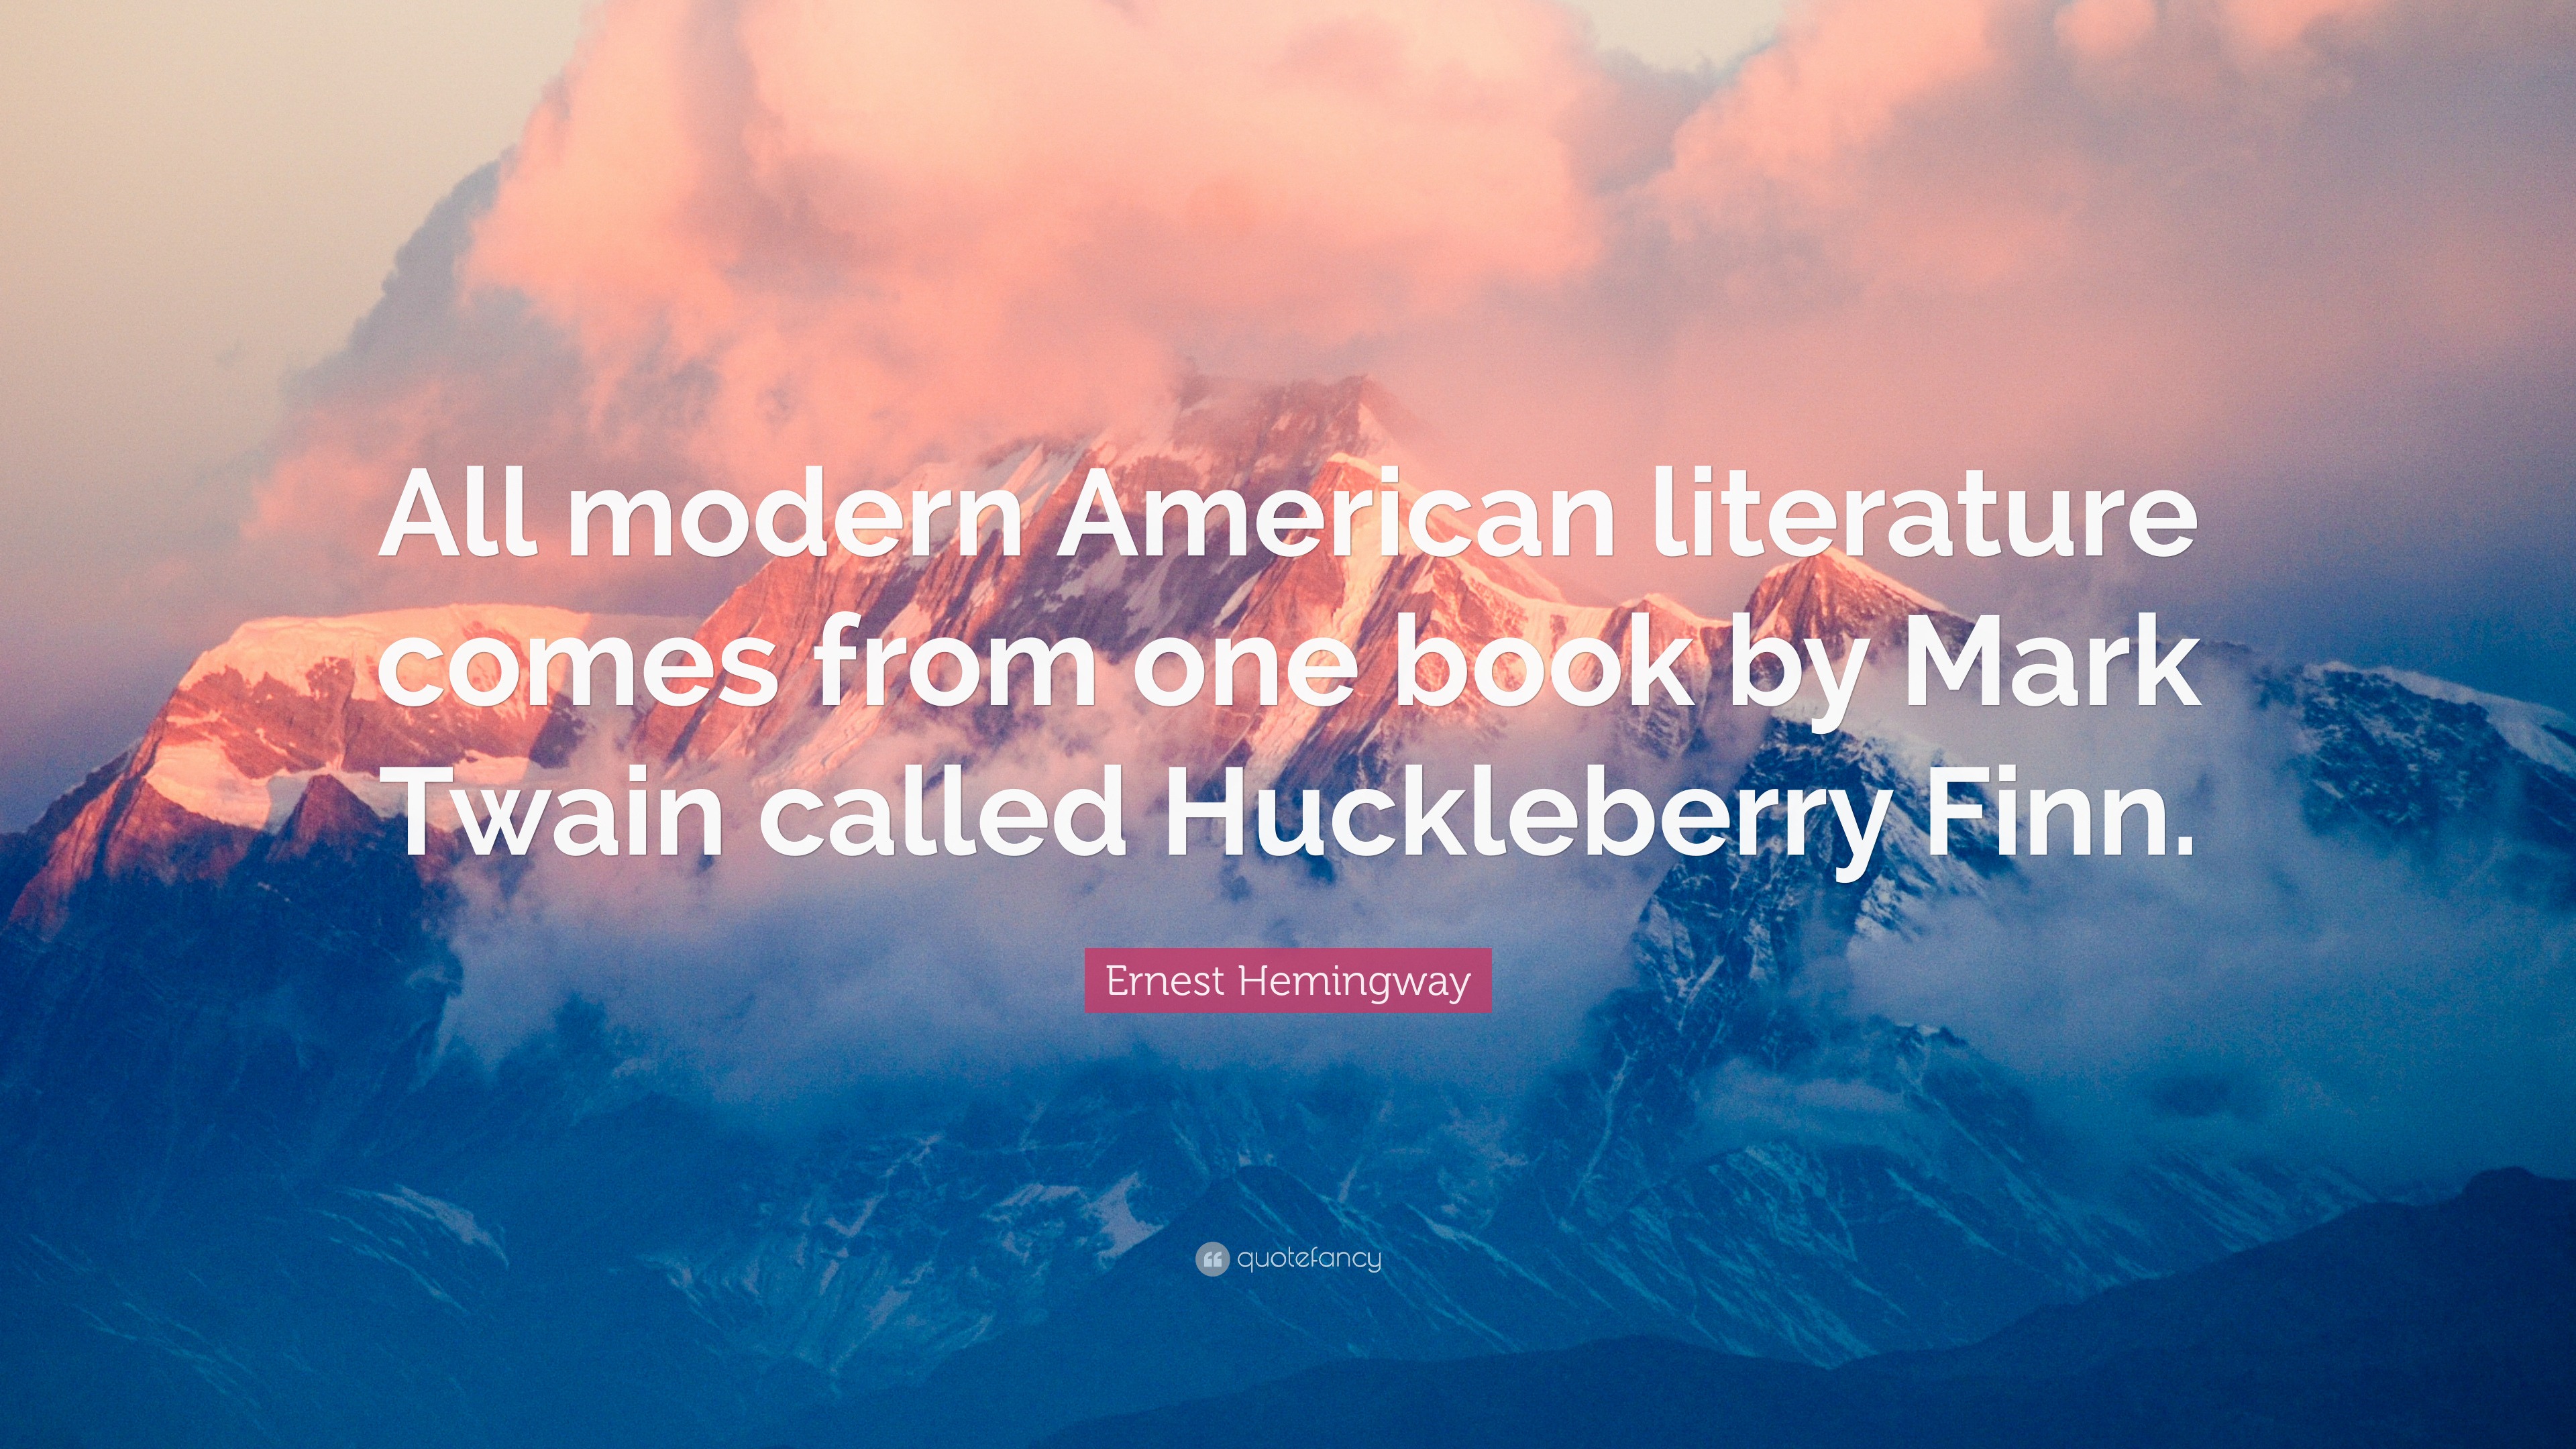 Ernest Hemingway Quote: "All modern American literature comes from one book by Mark Twain called ...